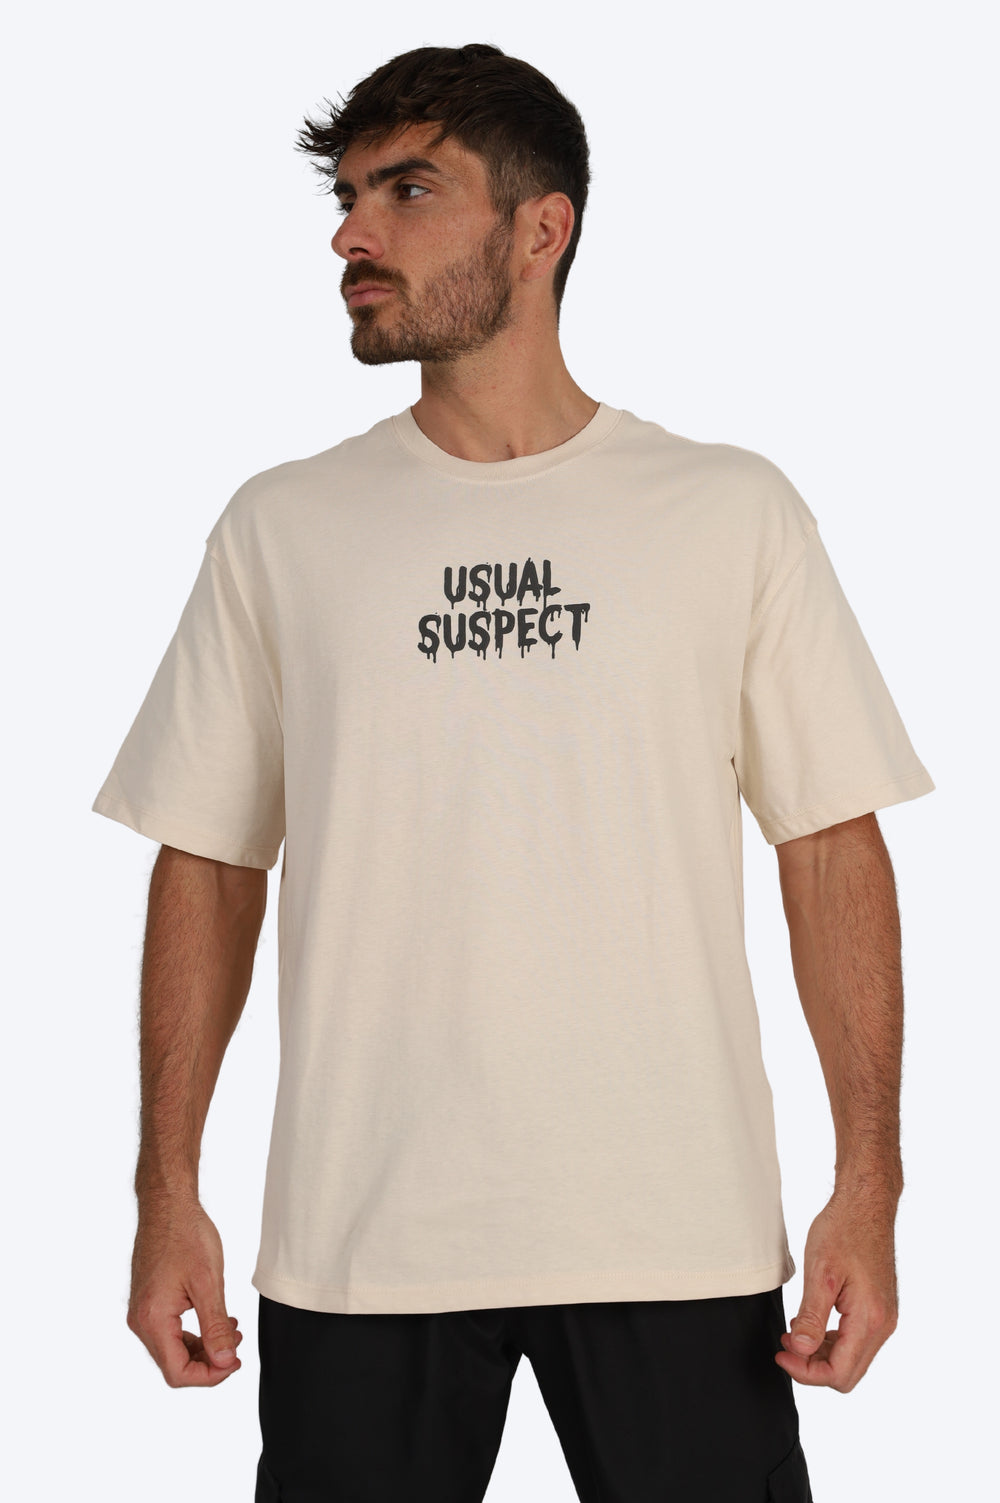 T-SHIRT USUAL SUSPECT - BEIGE